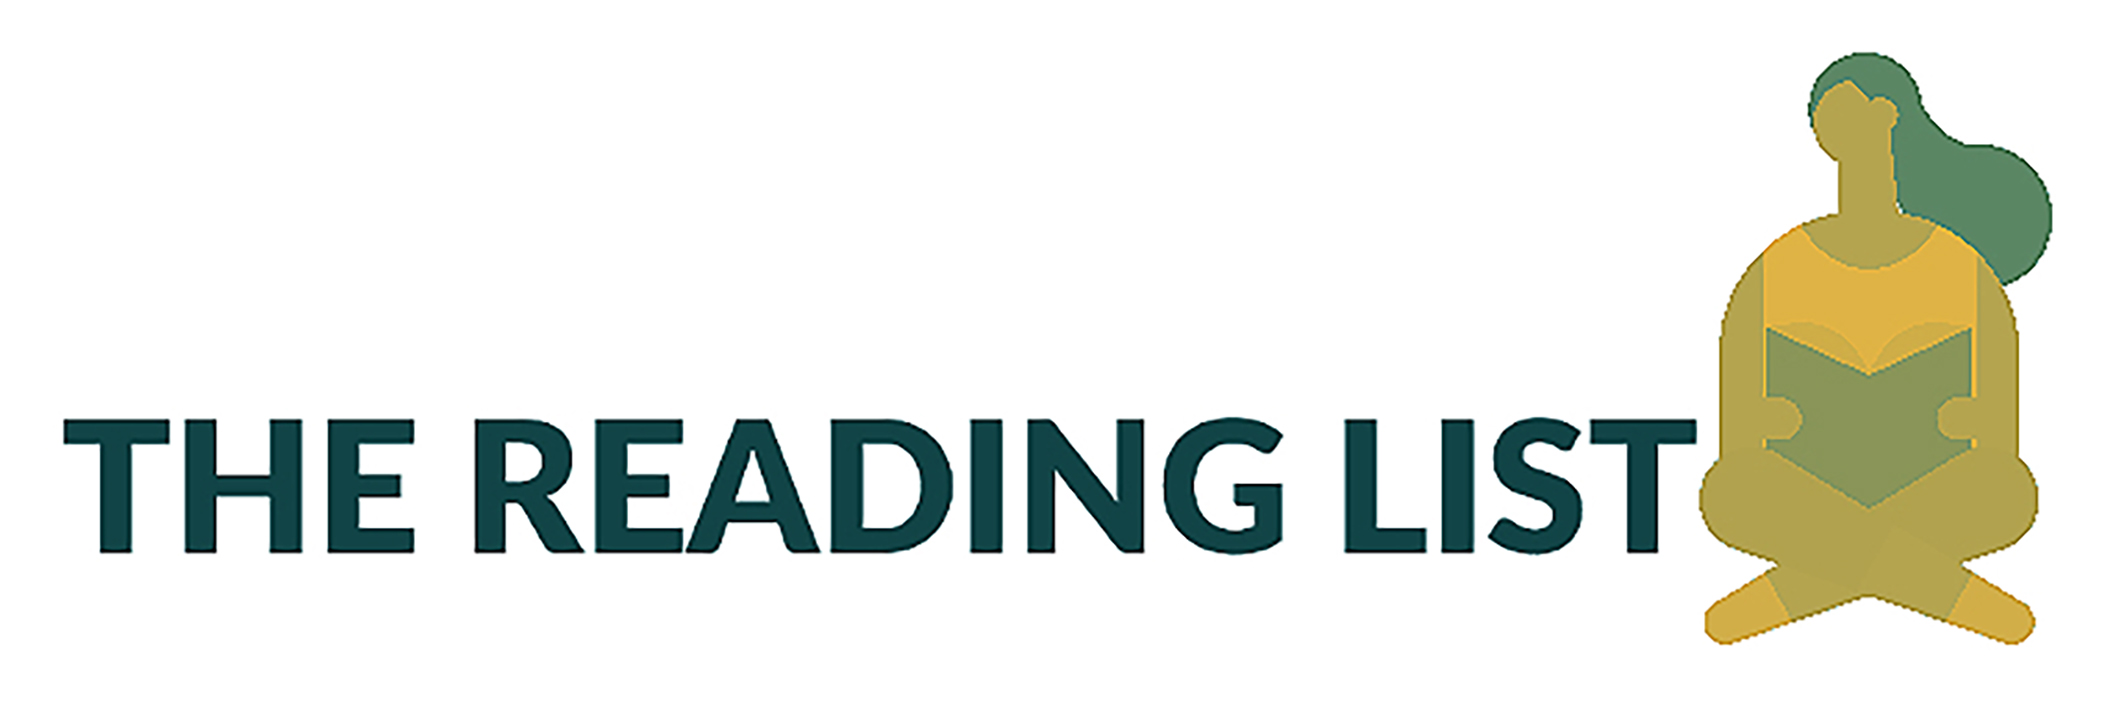 Logo for the “Reading List” newsletter. Text reads “THE READING LIST” in dark teal. A drawing of a person on the right side of the text shows them sitting cross-legged and reading a book. The drawing is in gold. The background is white.